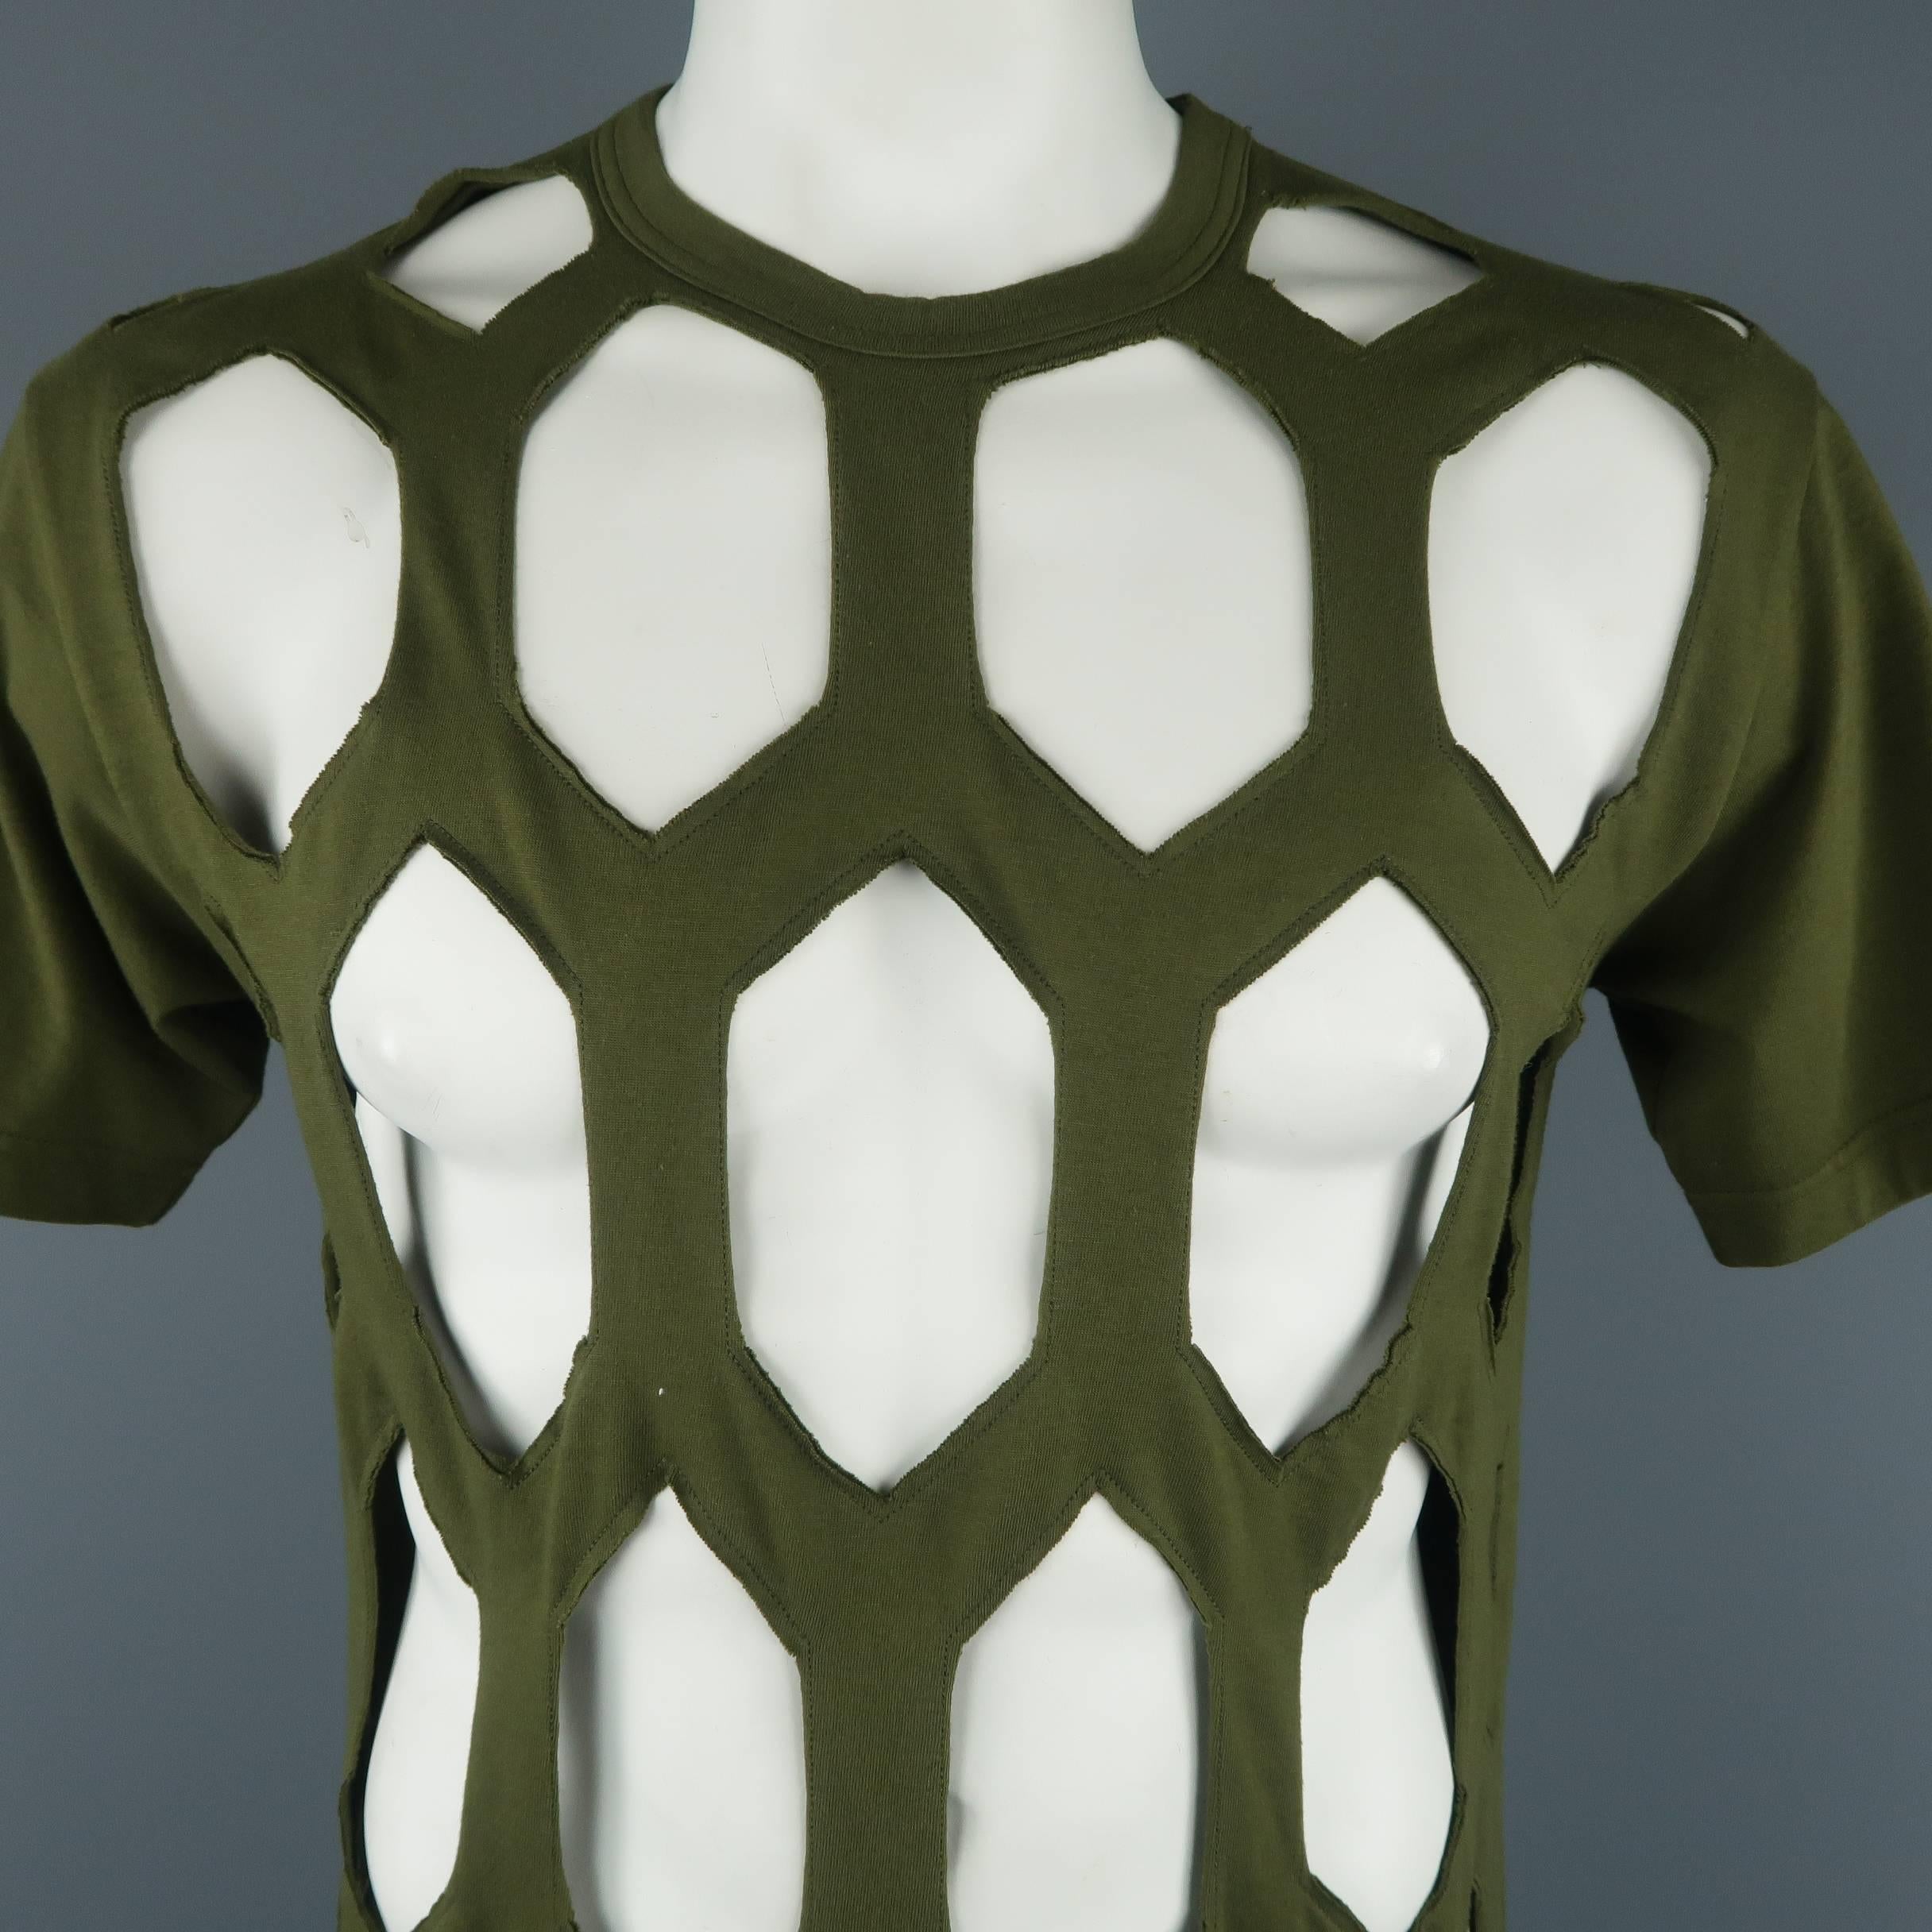 COMME Des GARCONS HOMME PLUS T shirt comes in olive green cotton jersey with diamond patter mesh cutouts. Made in Japan.
 
New with Tags.
Marked: L (AD2014)
 
Measurements:
 
Shoulder: 19 in.
Chest: 44 in.
Sleeve: 8.5 in.
Length: 31 in.
SKU: 87898